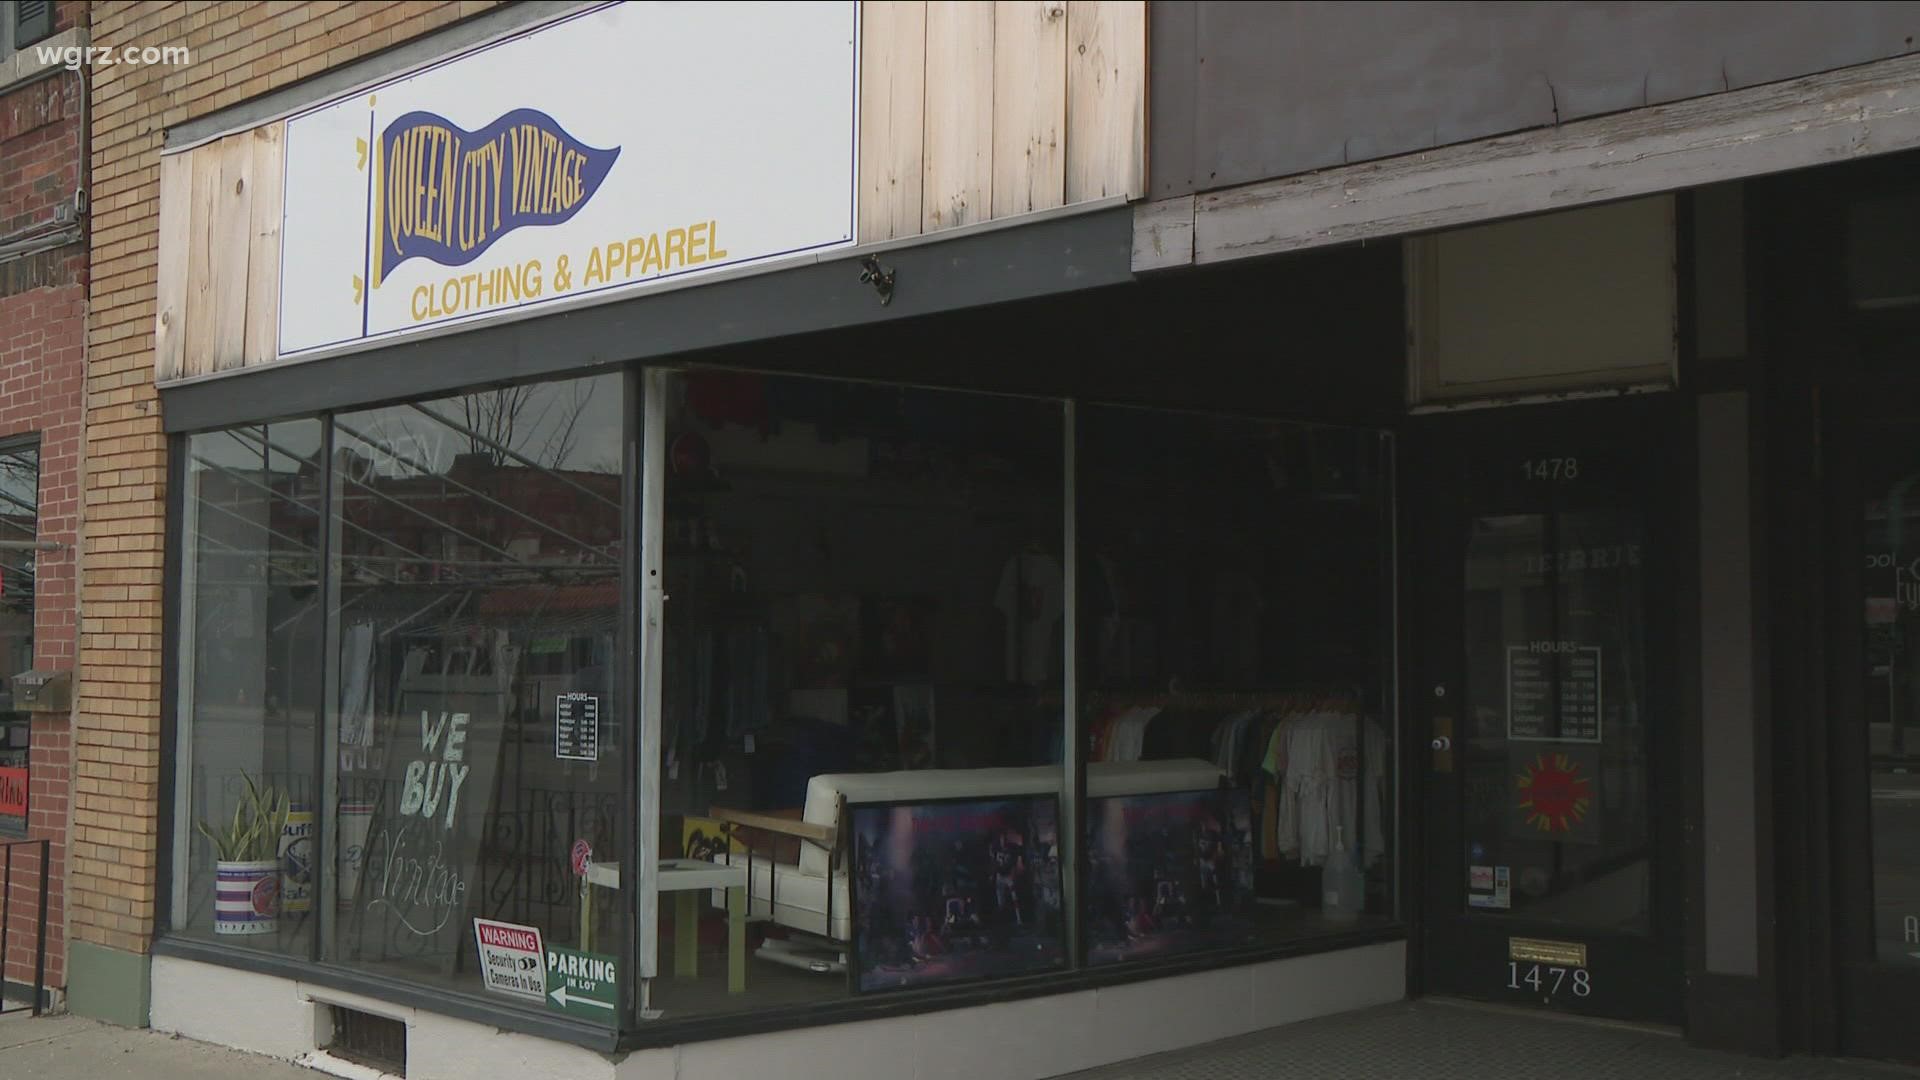 After closing eight years ago, the popular Buffalo vintage store "Queen City Vintage" is behind the push to bring it back.